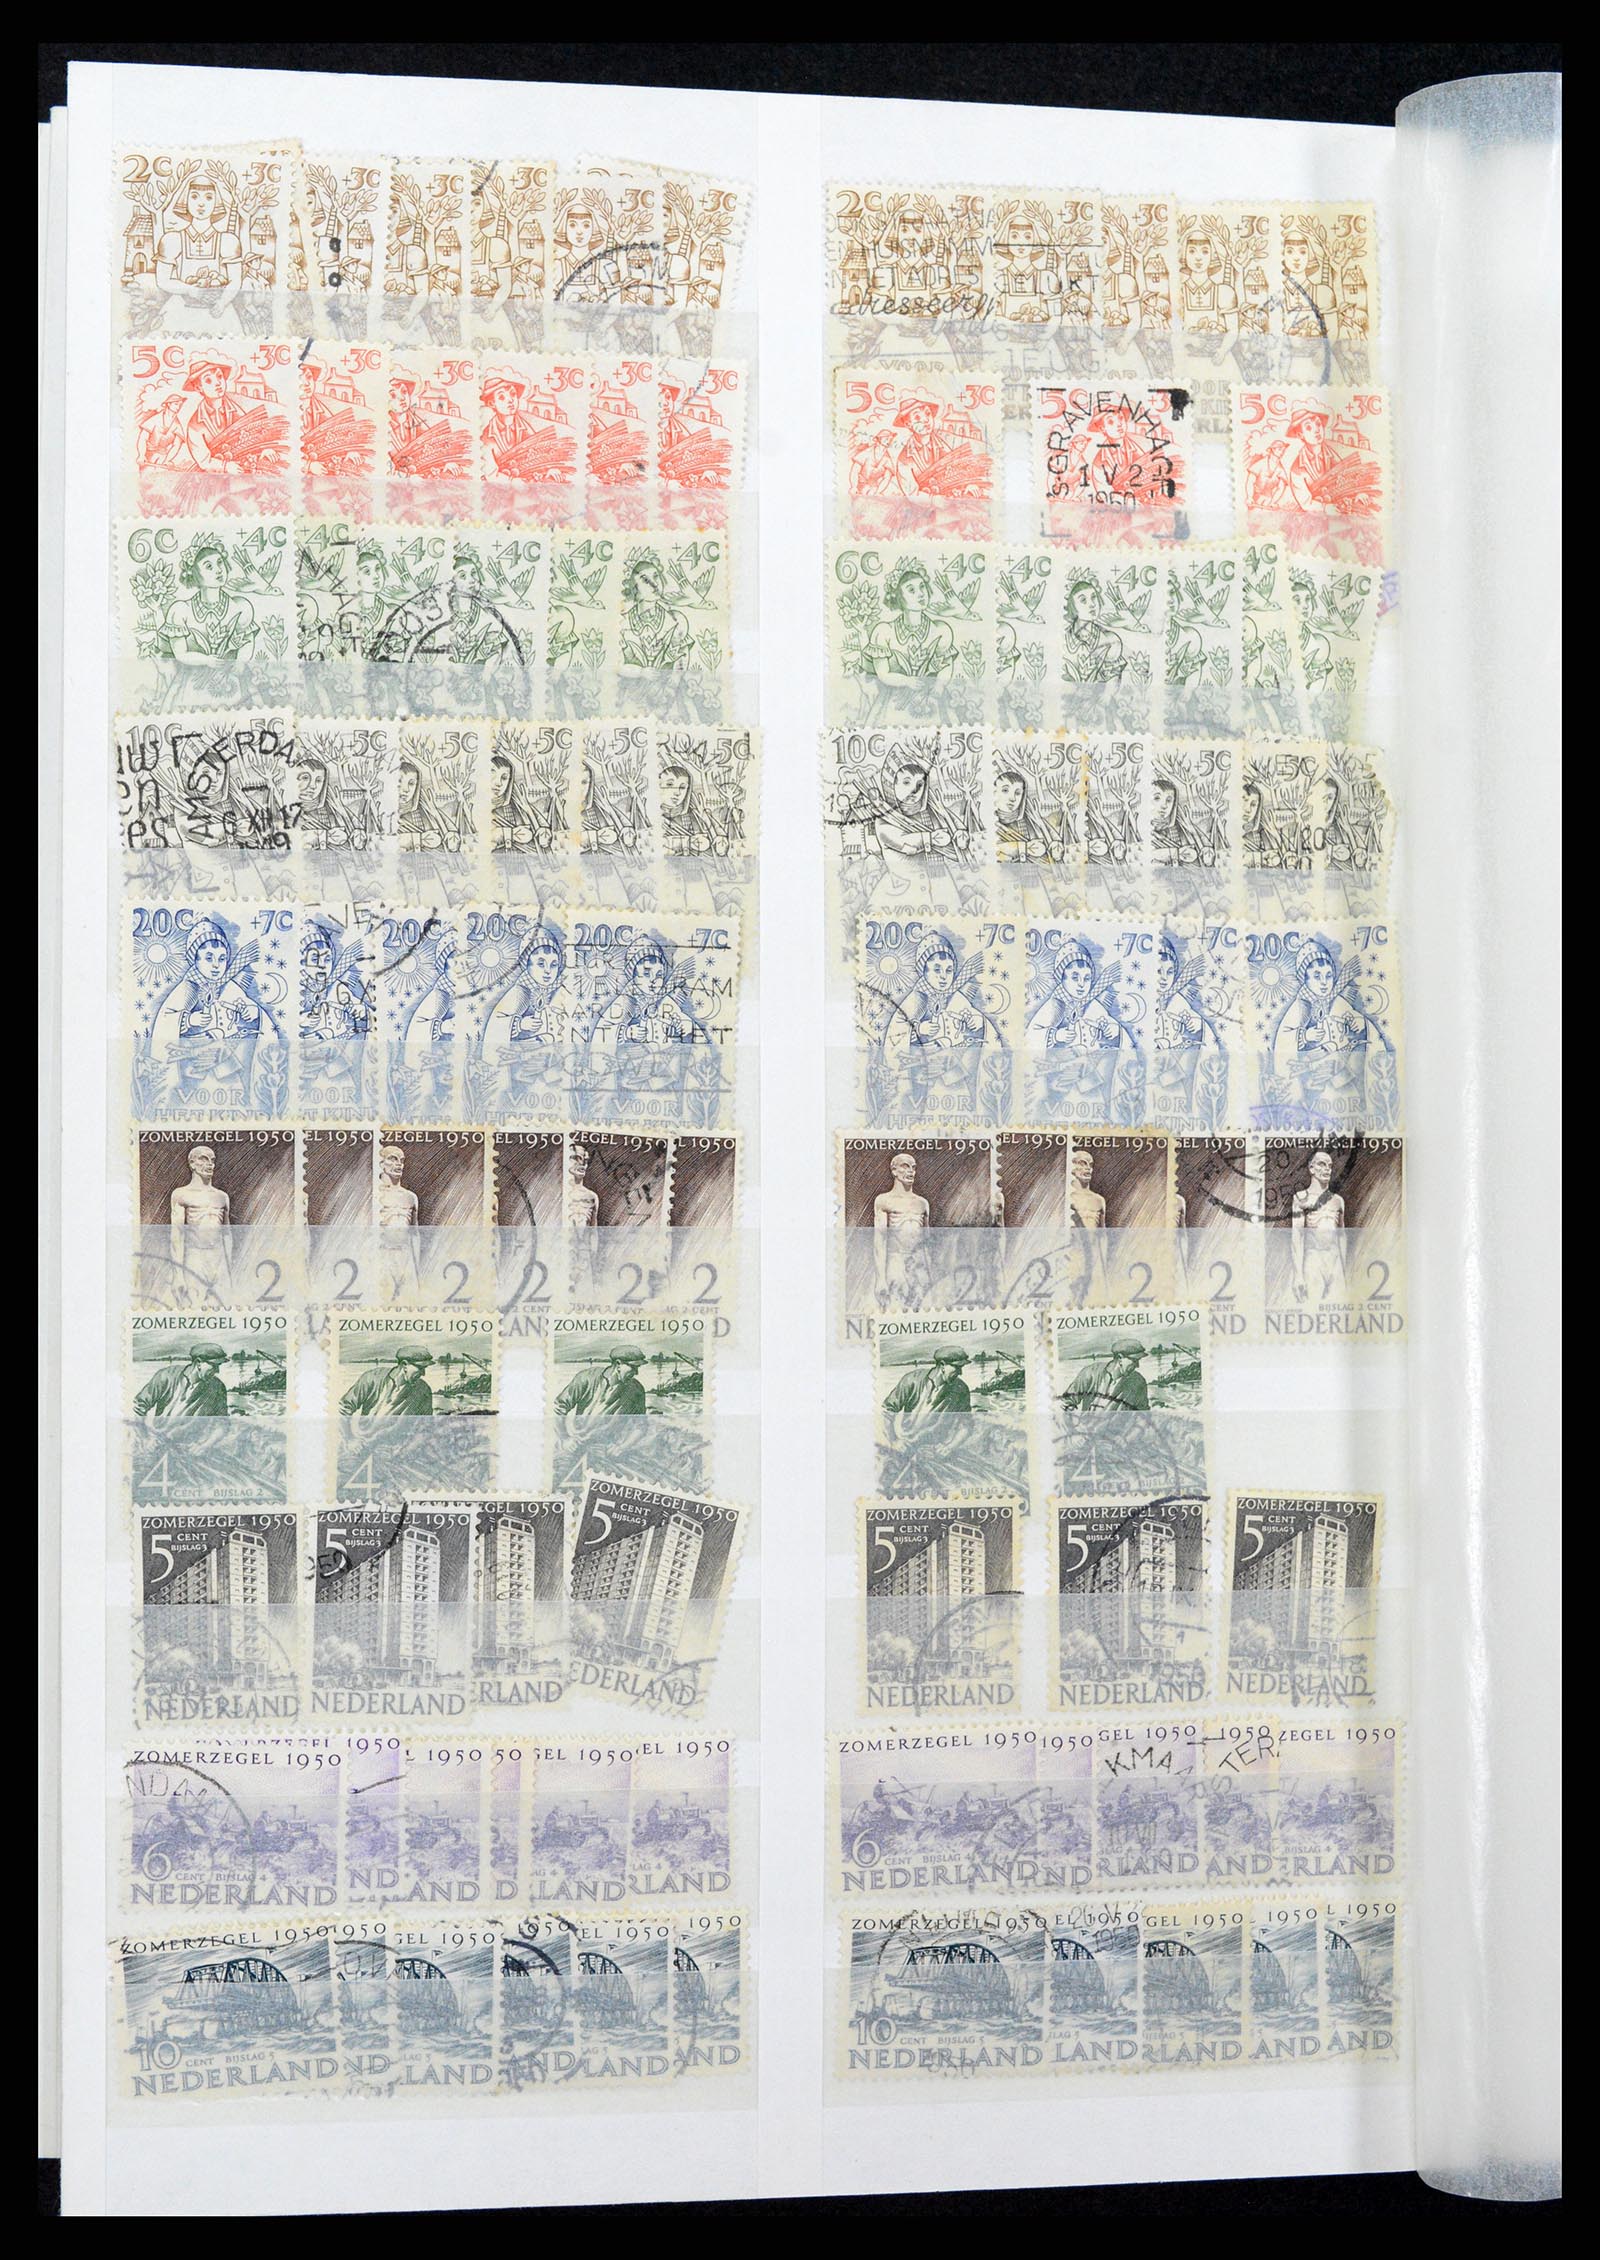 37296 054 - Stamp collection 37296 Netherlands 1852-1981.